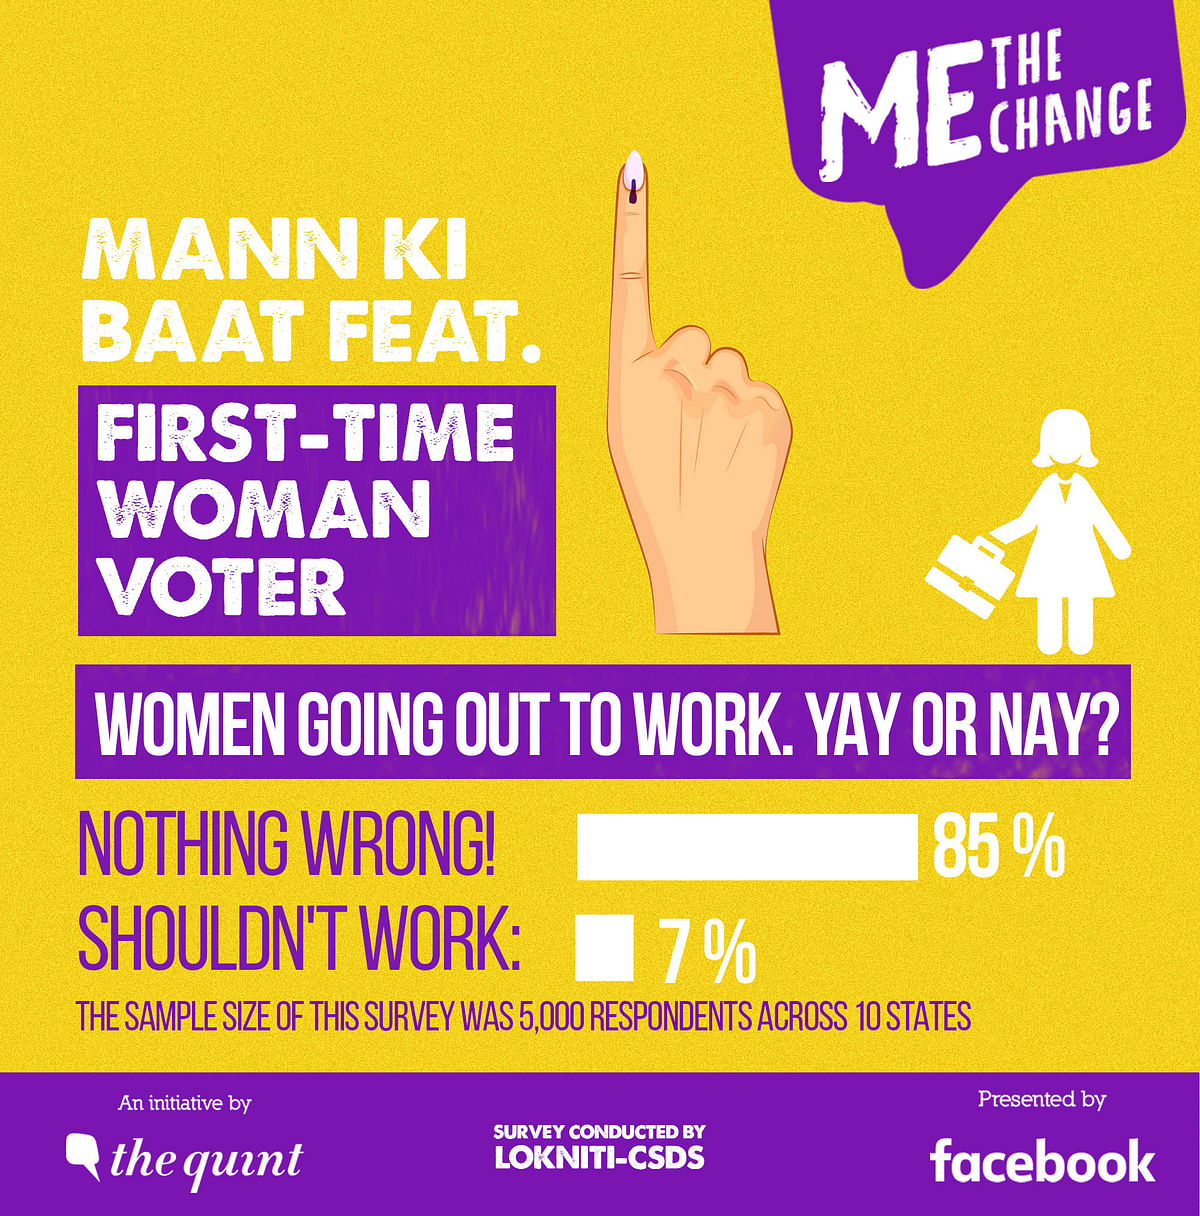 Education, choosing a career and marriage – is the first-time woman voter free to make her choices? 